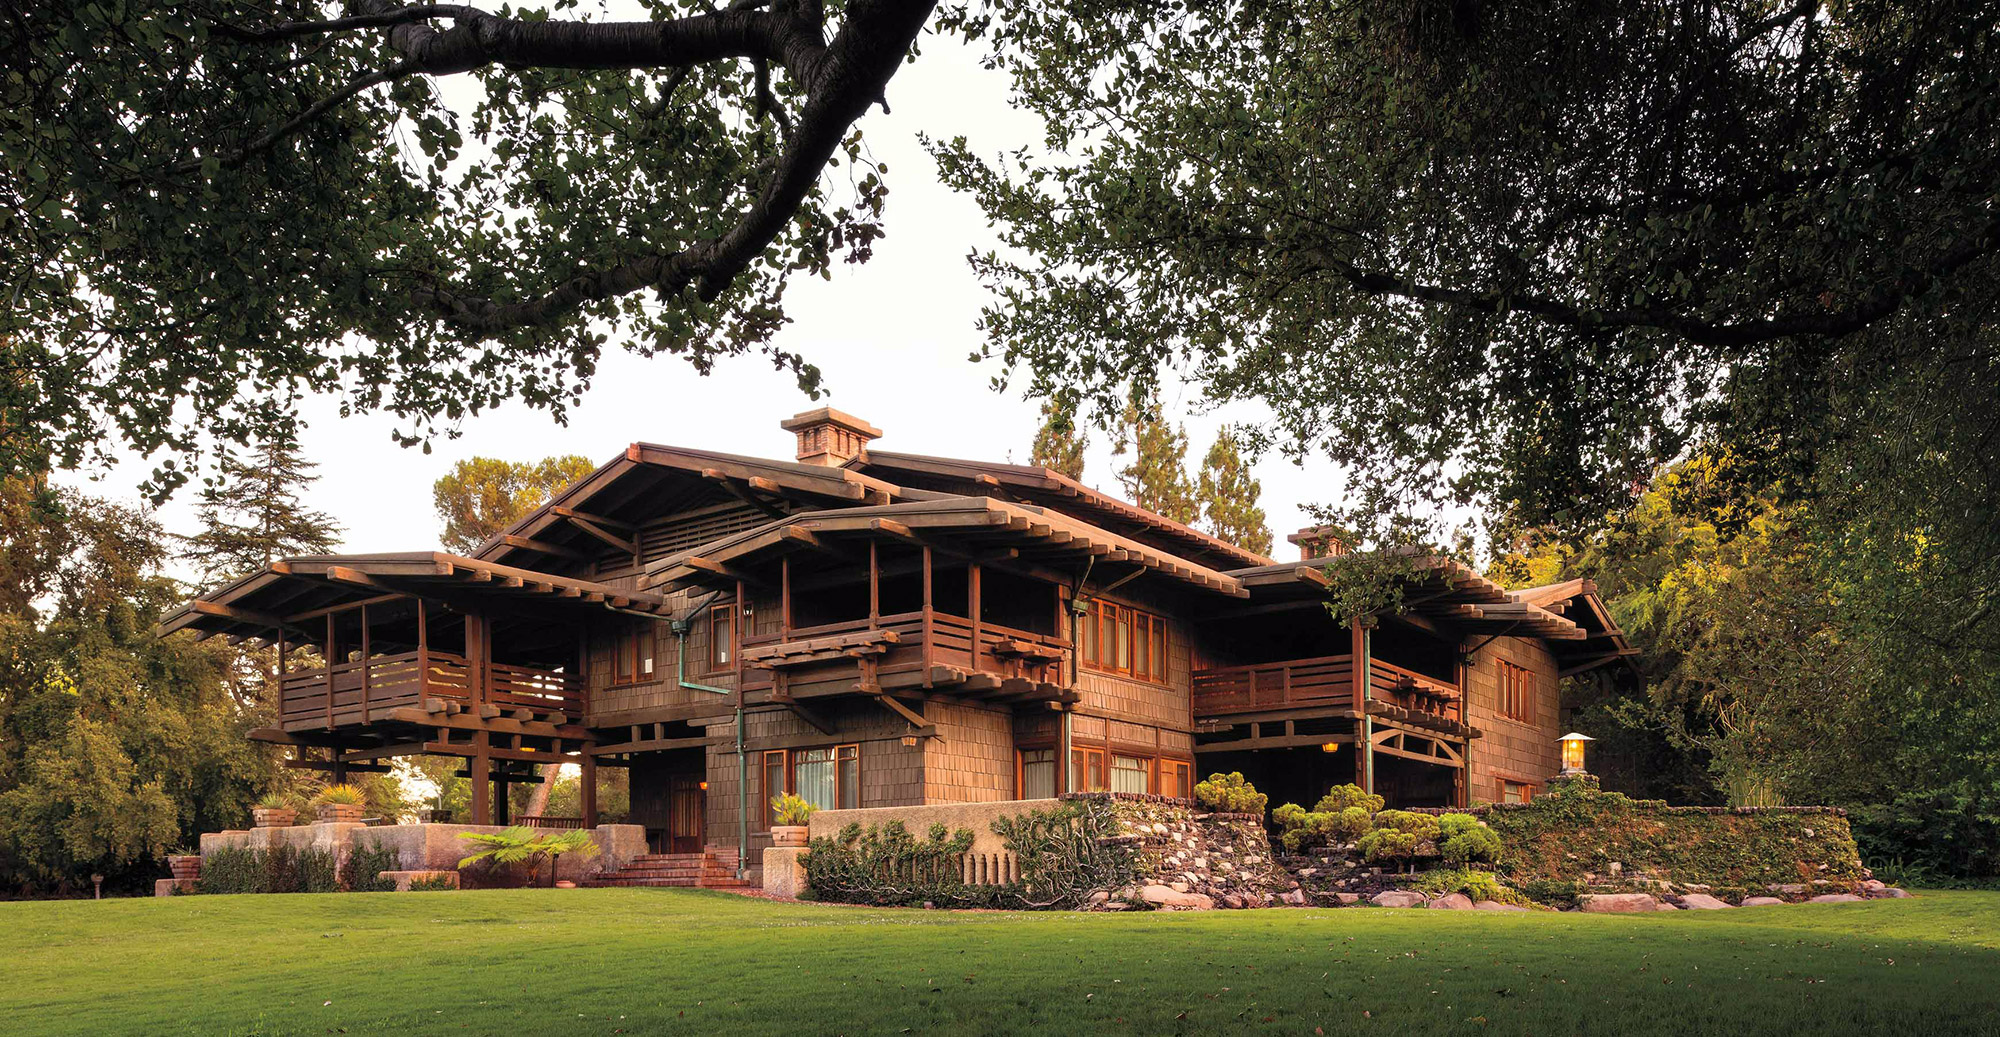 The Gamble House by Greene and Greene: American Arts and Crafts